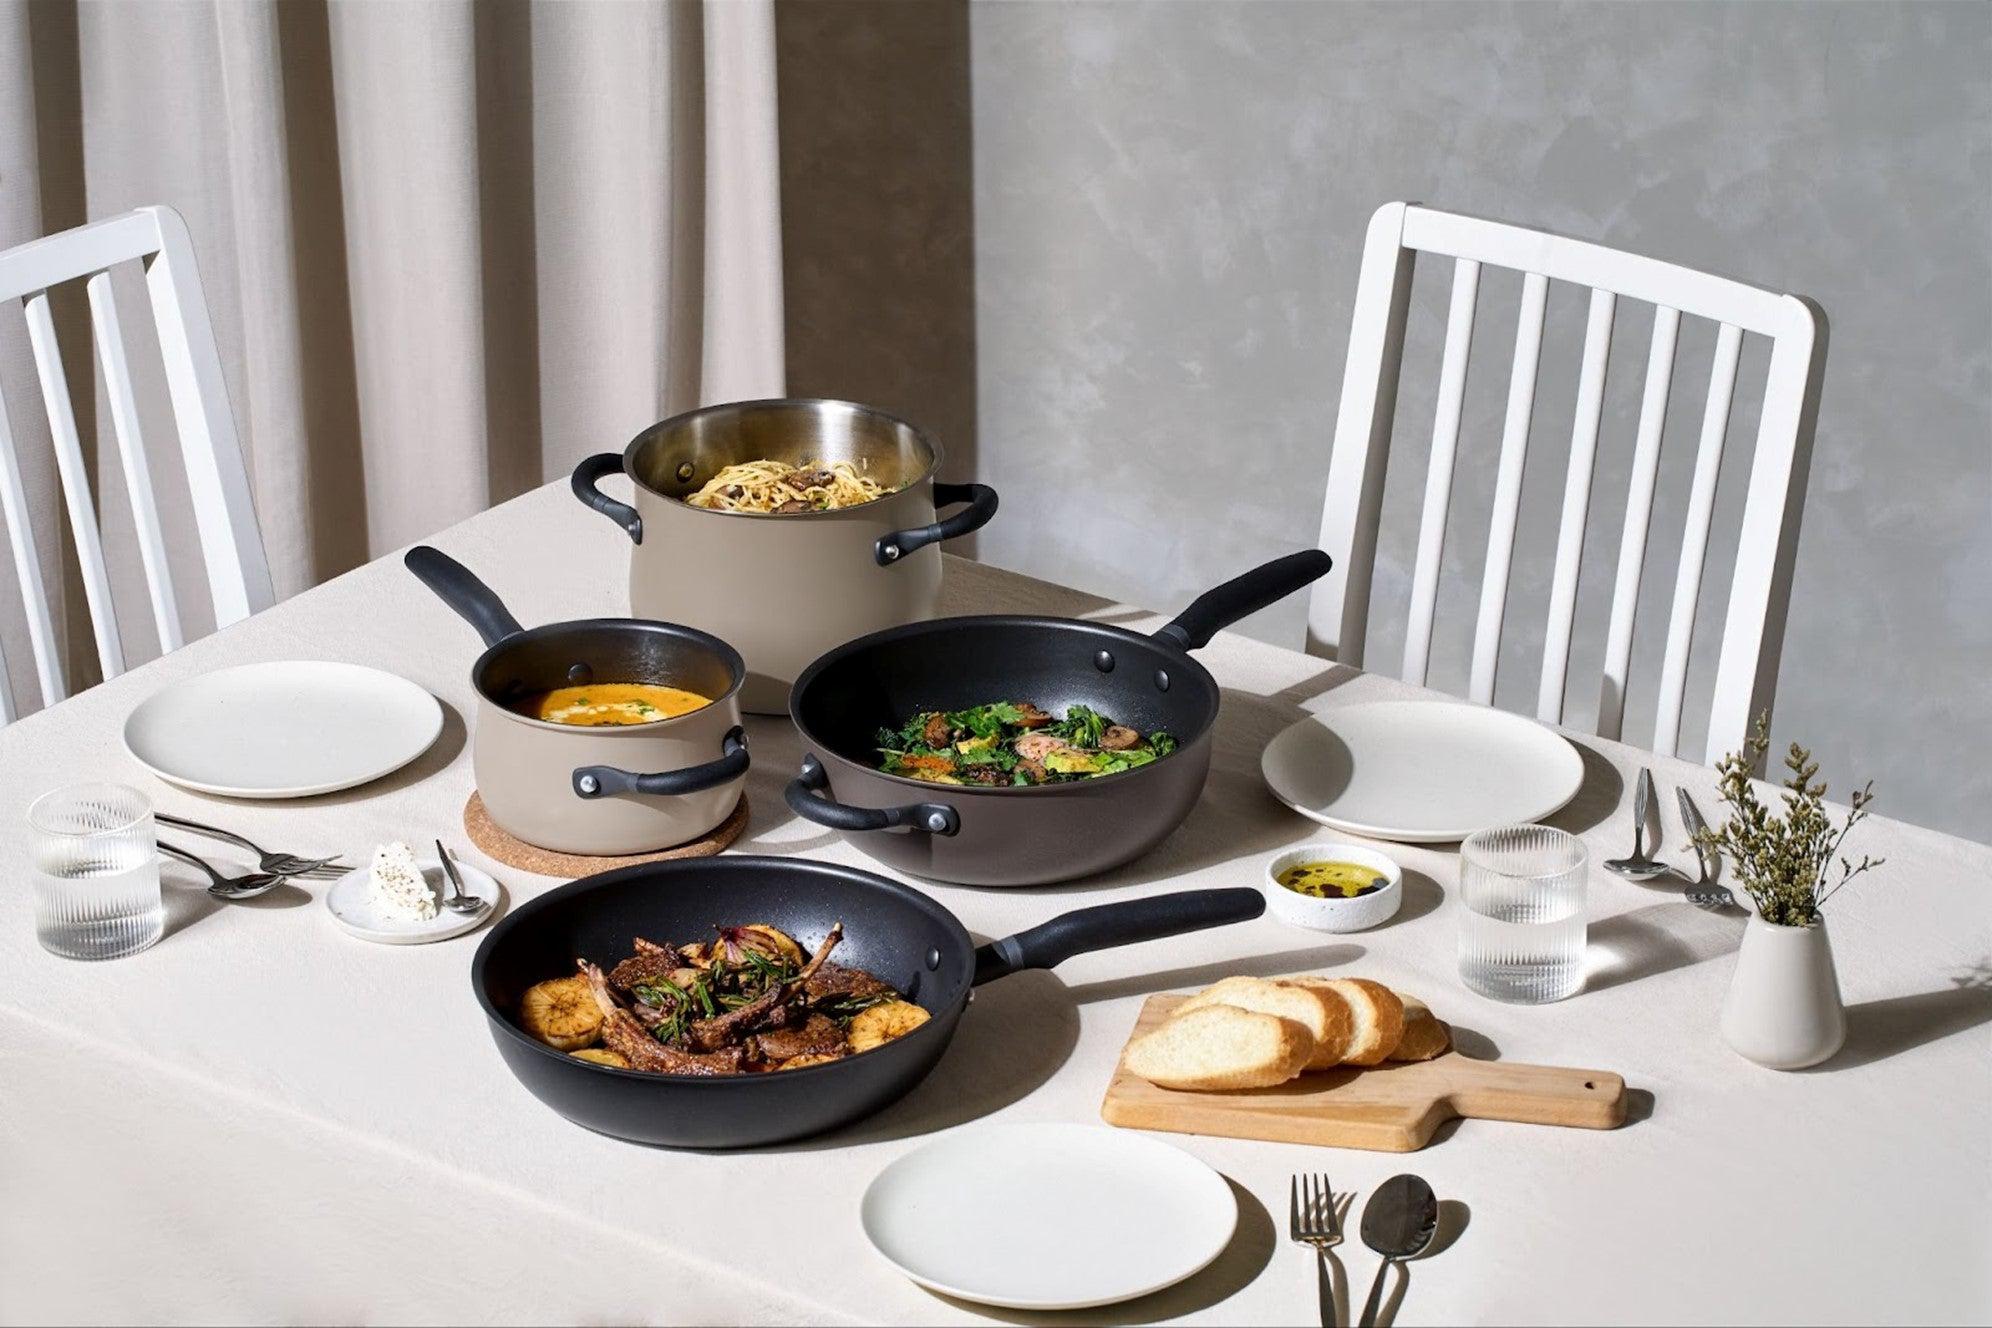 The Meyer Cookware essential set in cinder and smoke colors, featuring a skillet pan, chef's pan, saucepan, and stockpot, beautifully presented with a delicious meal on a pristine white table setting